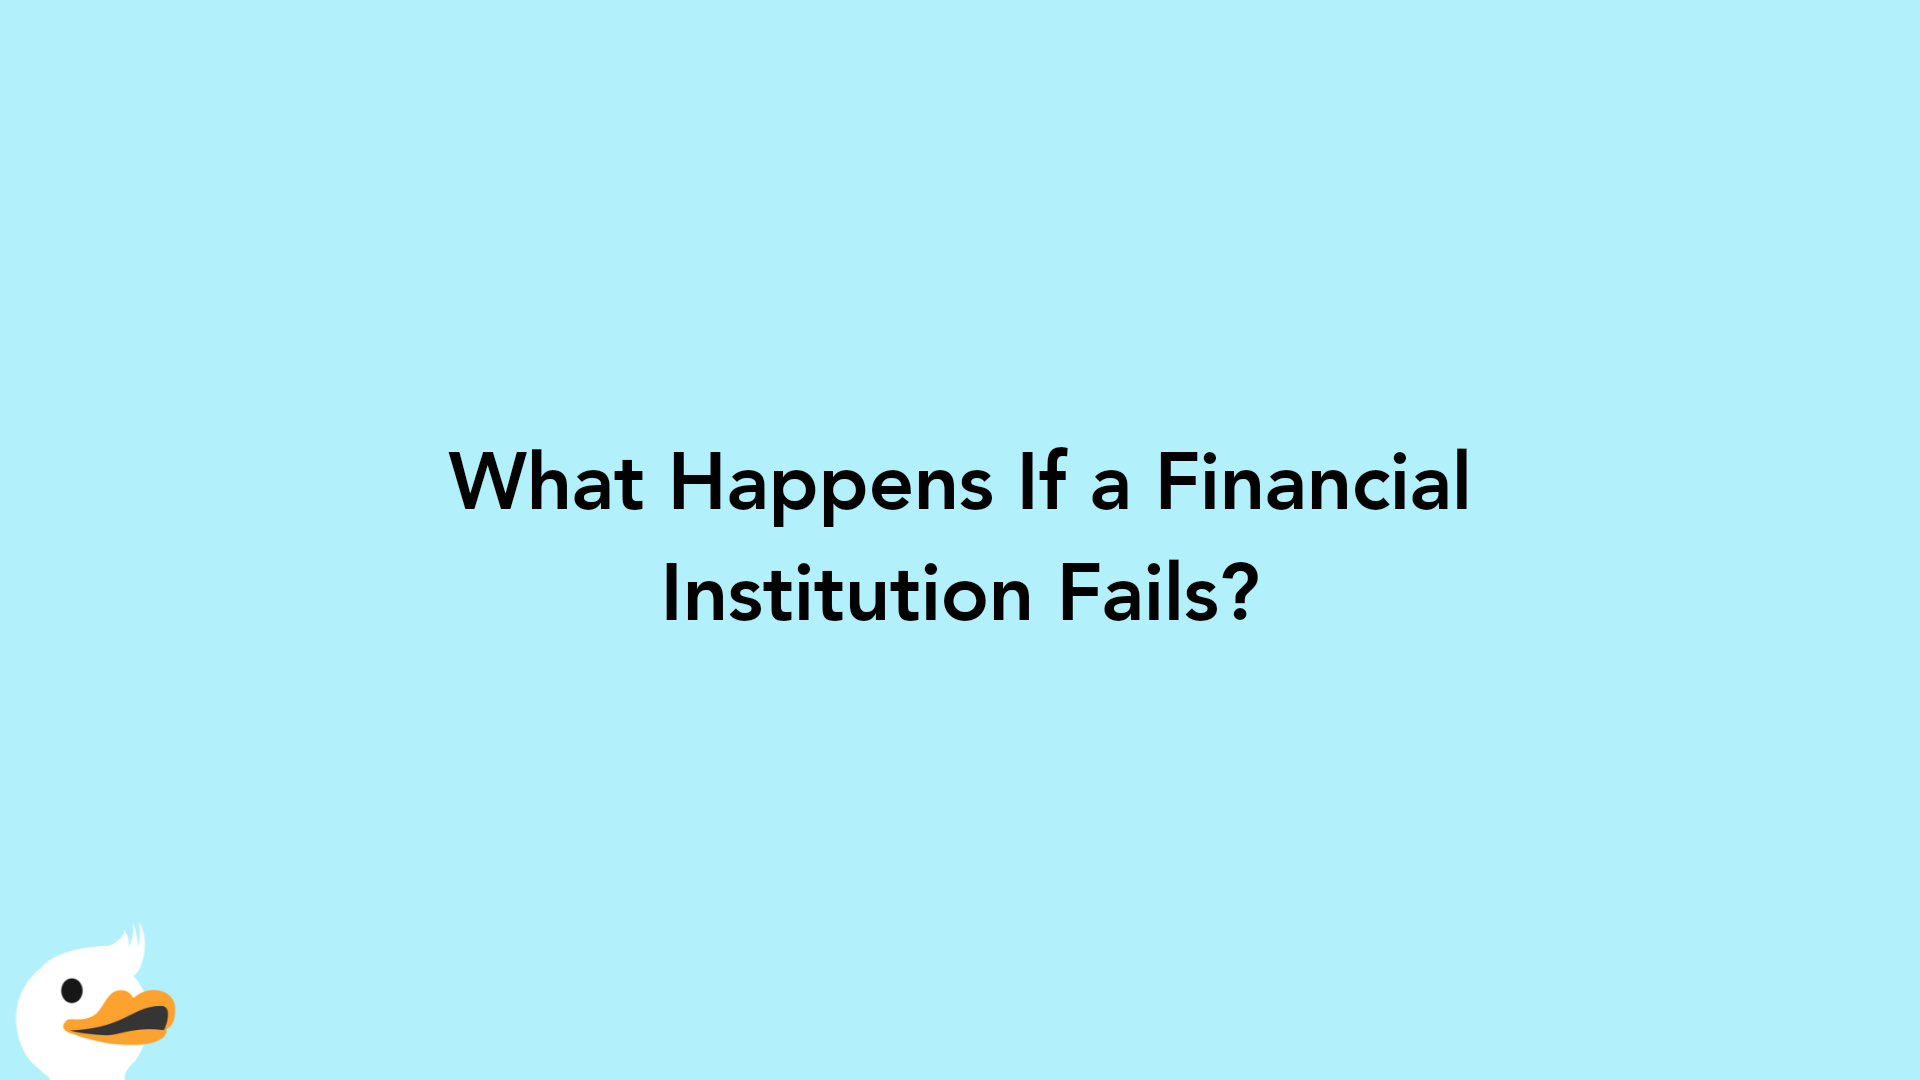 What Happens If a Financial Institution Fails?